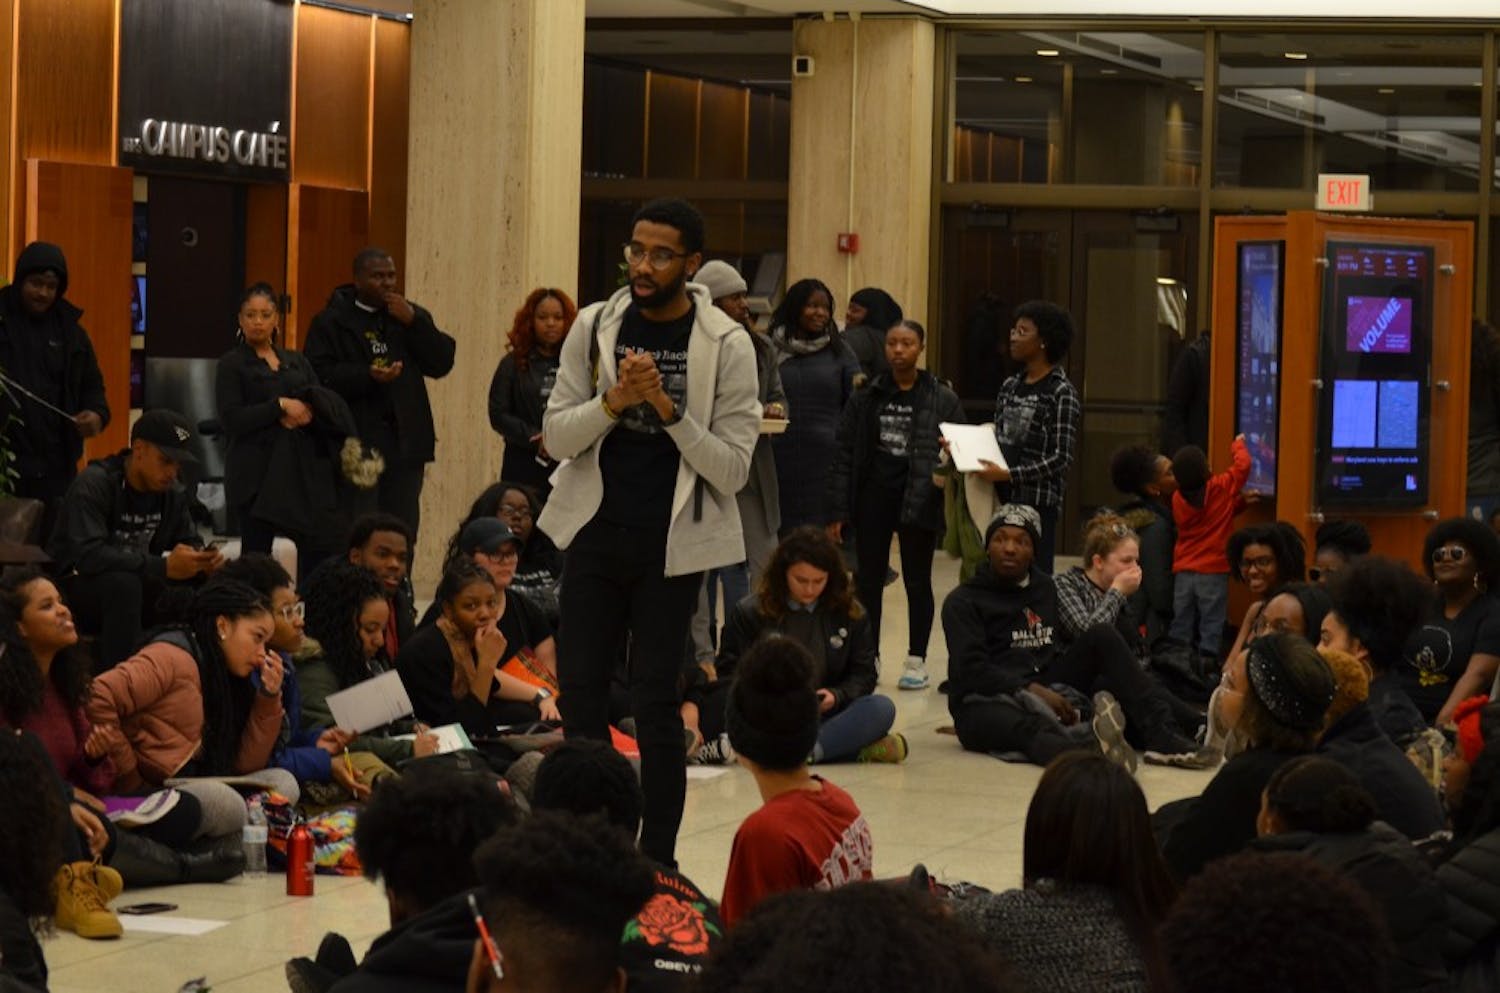 GALLERY: Members of the Black Student Union attend a campus sit-in